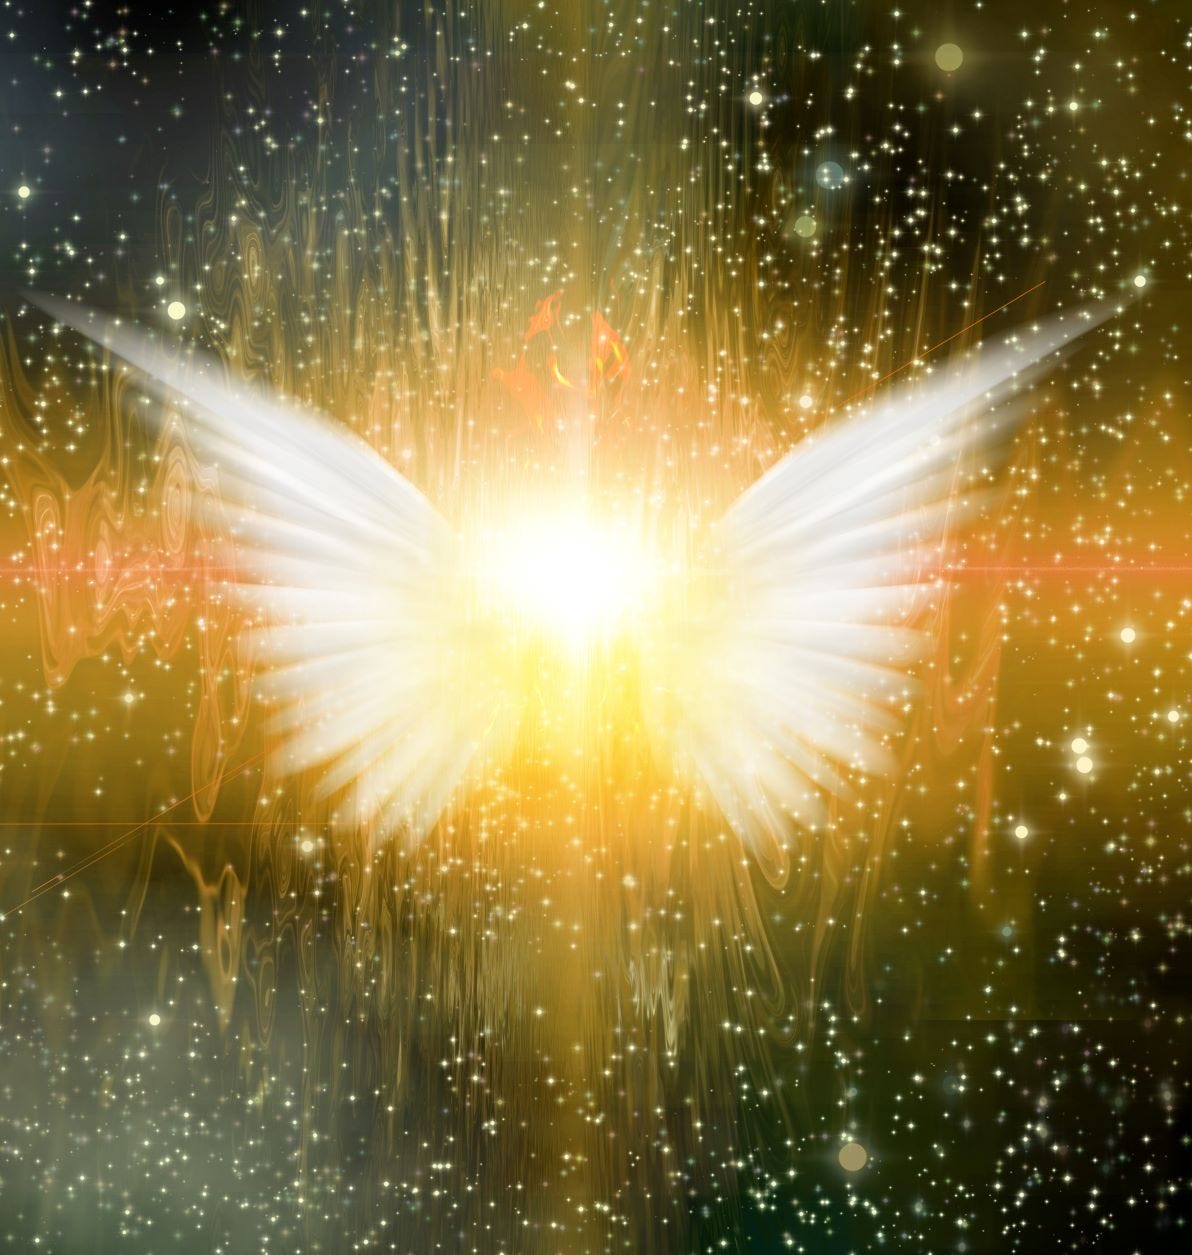 How to Receive Messages from the Angels | by Pamela Landolt Green | Medium